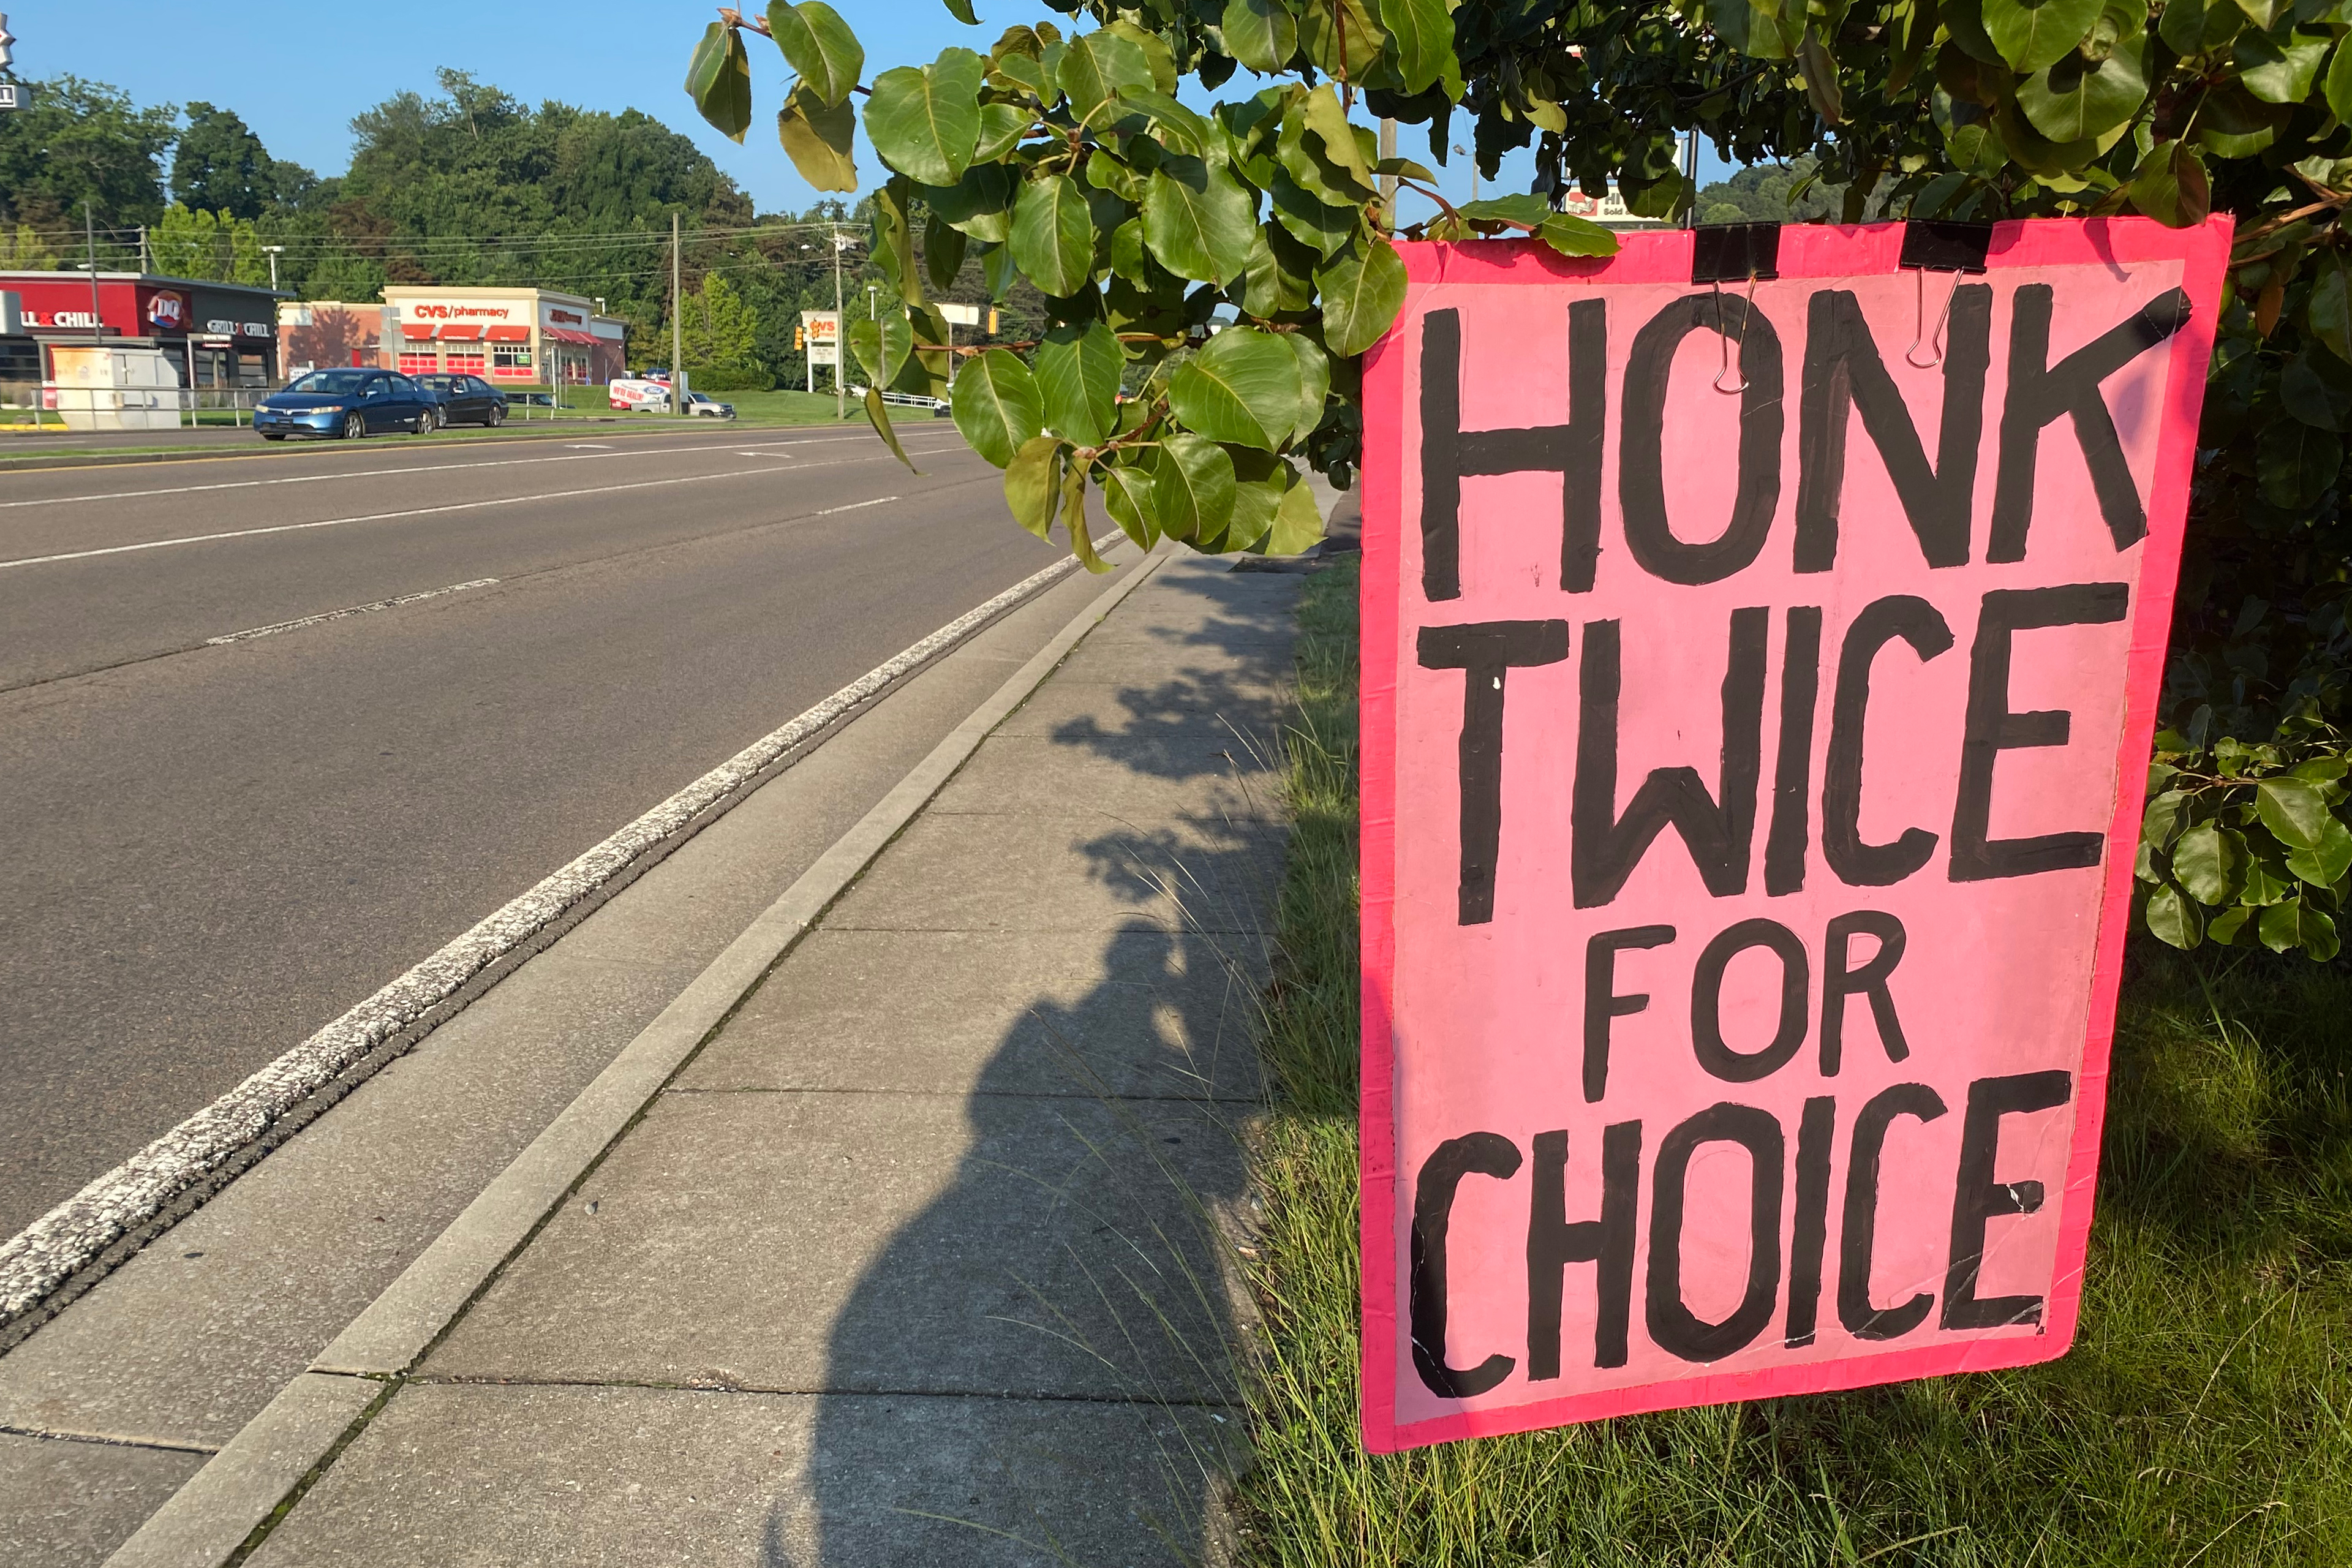 A photo shows a pink sign hung from a tree that reads, "Honk twice for choice."